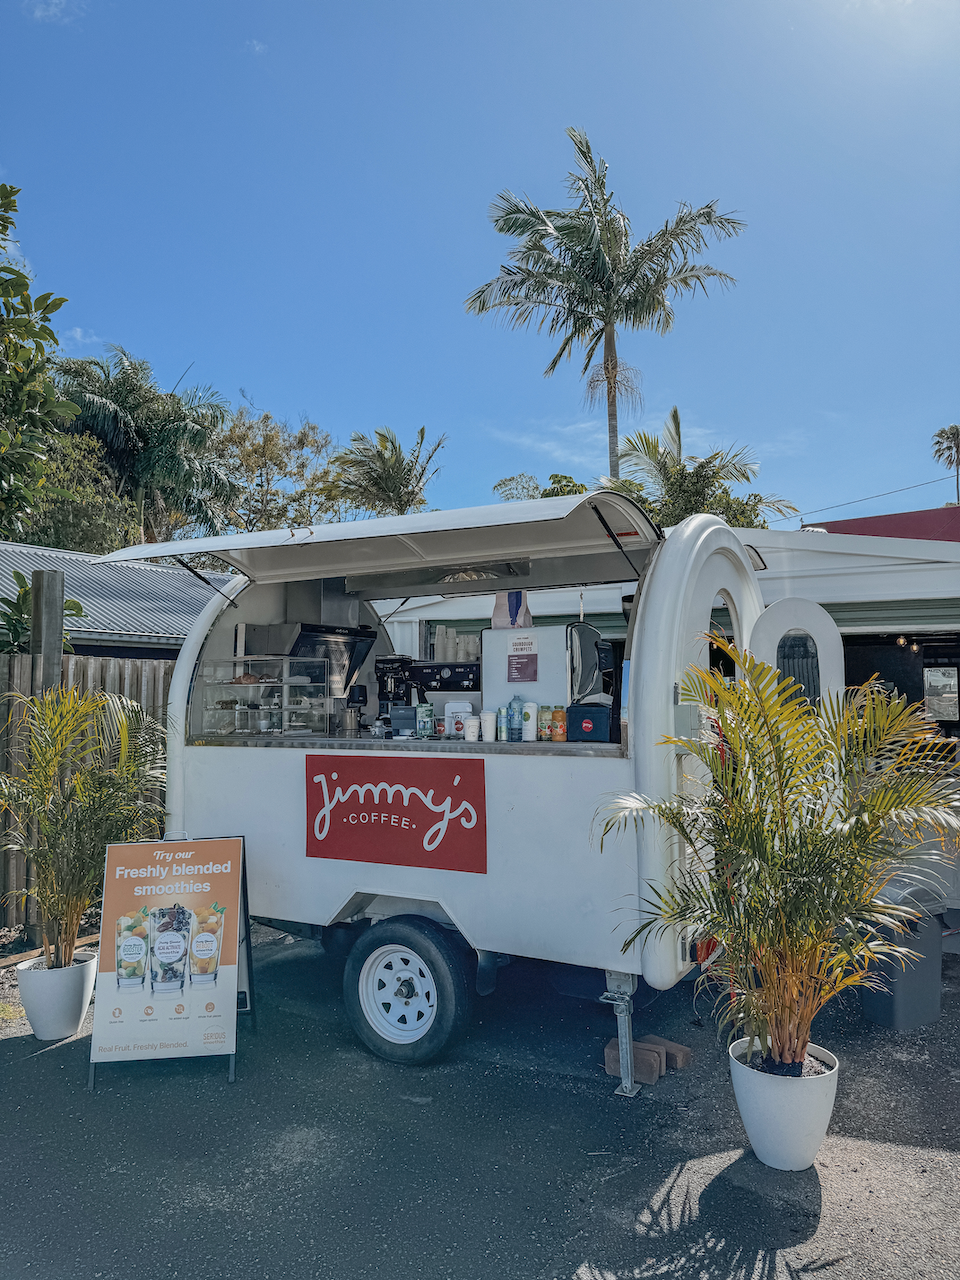 The cute little foodtruck from Jimmy's Coffee - Byron Bay - New South Wales - Australia